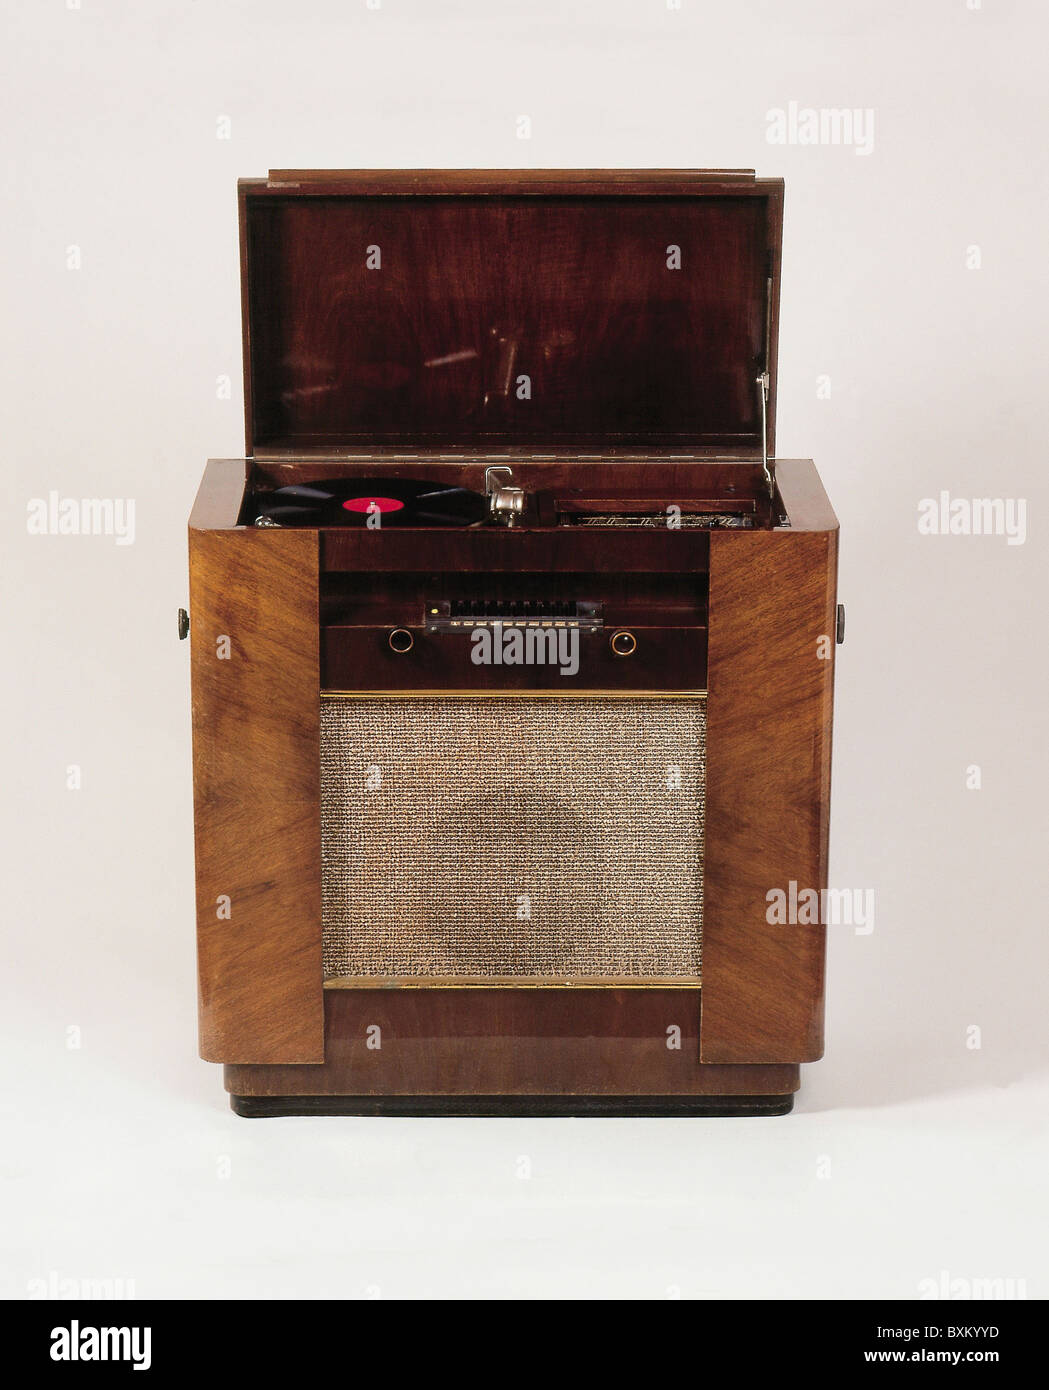 broadcast, radio, Philips music "D 65", with integrated radio set and record player, Germany, Additional-Rights-Clearences-Not Available Stock Photo - Alamy